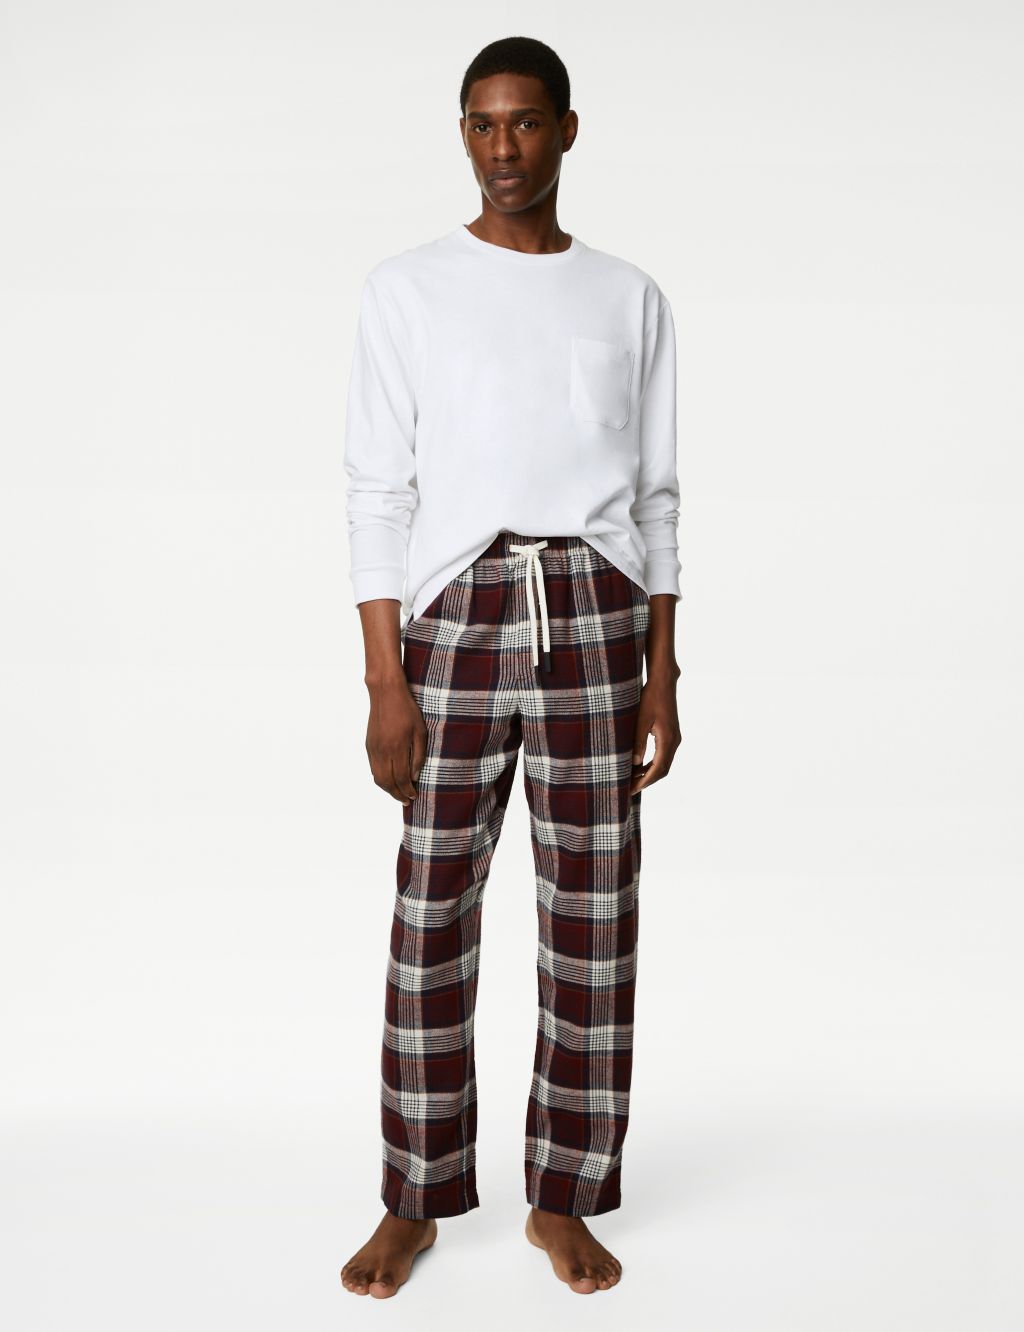 Brushed Cotton Checked Loungewear Bottoms image 1